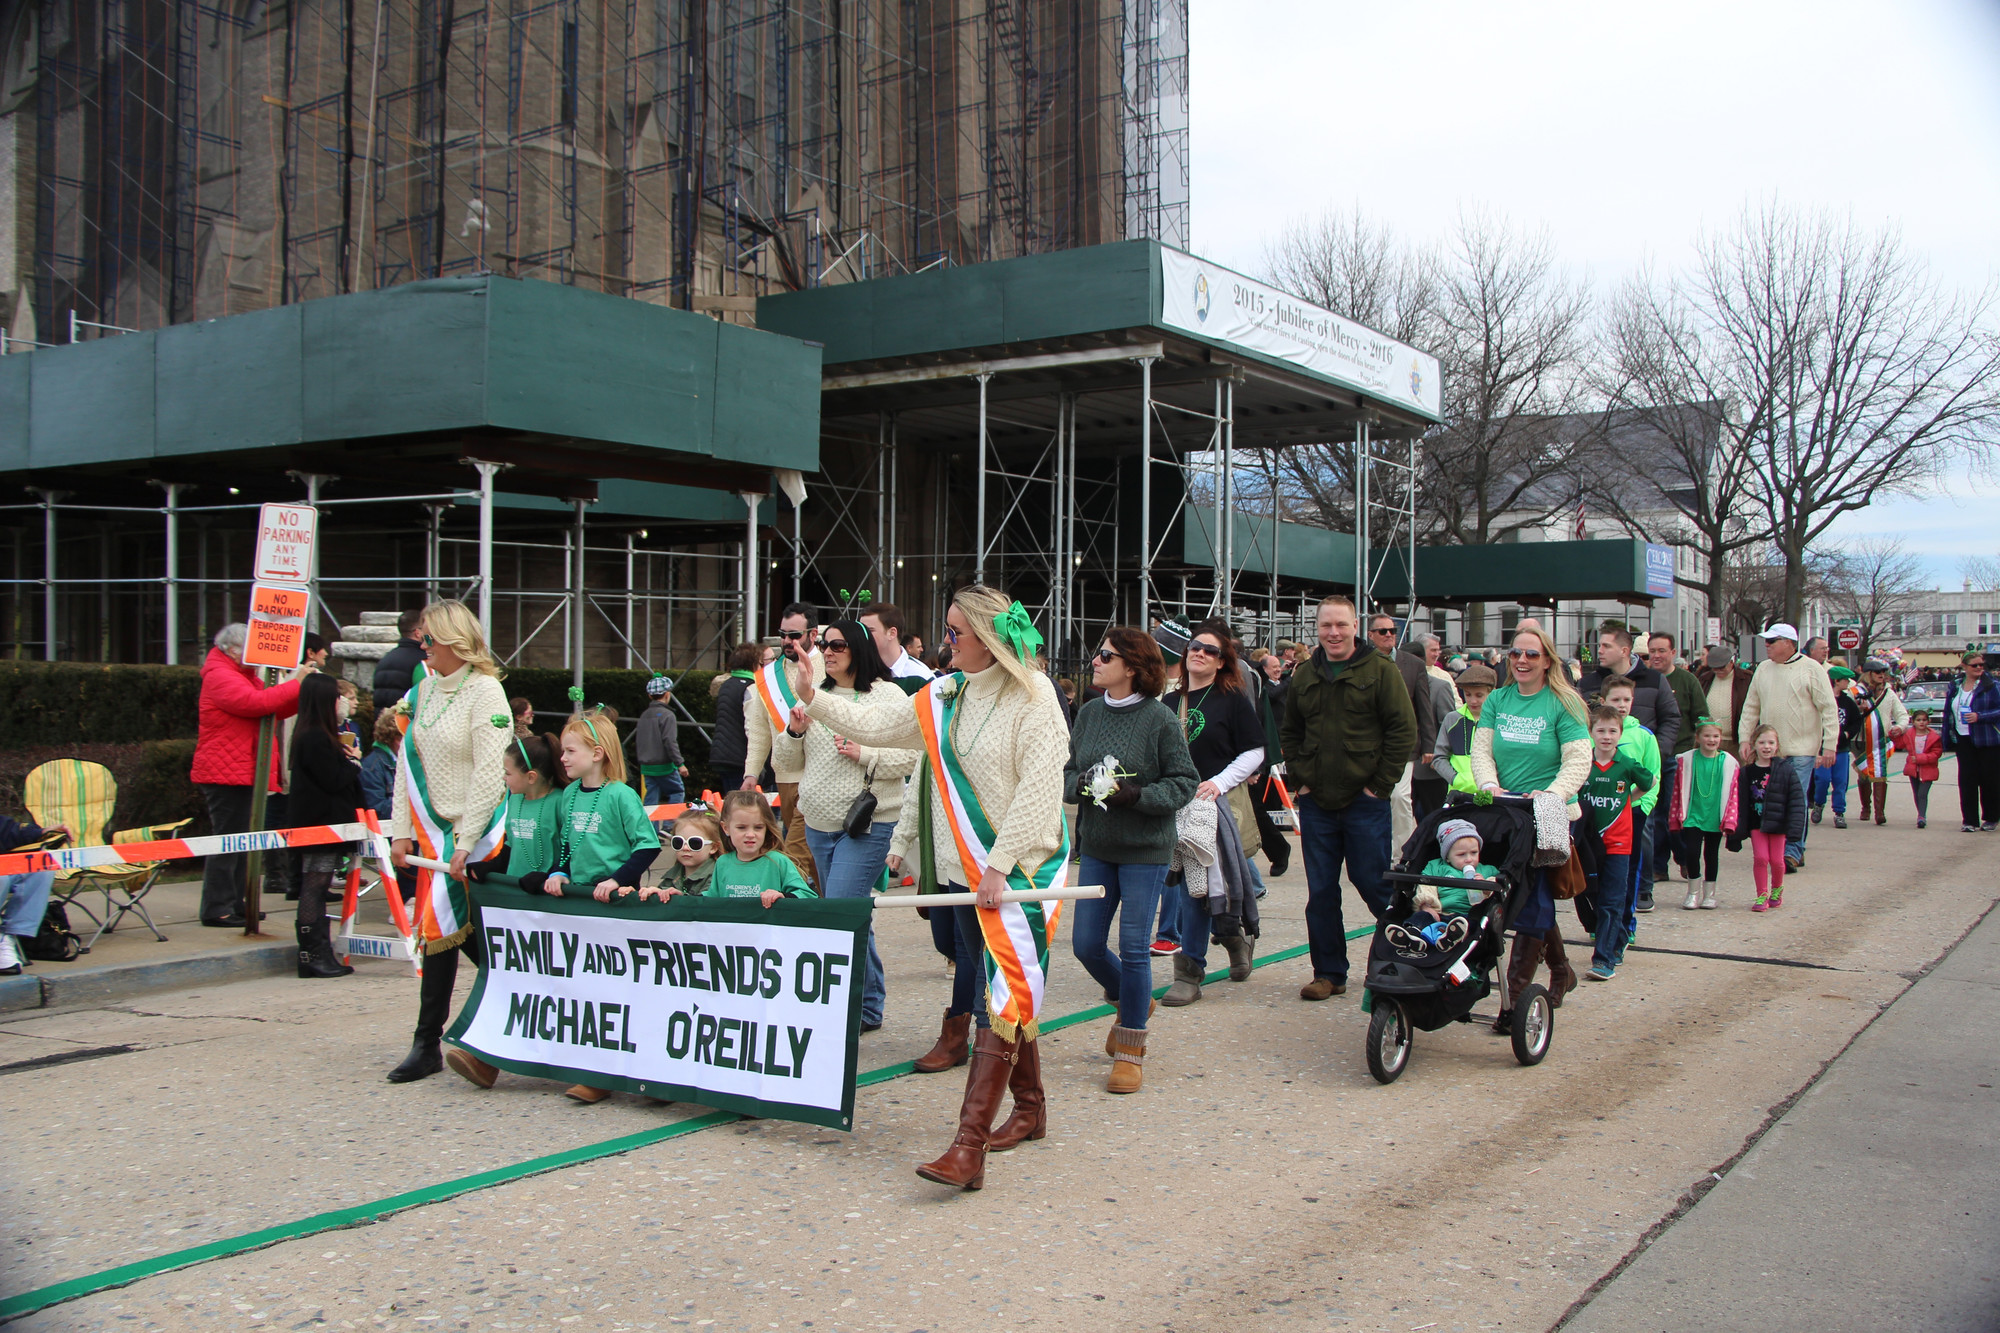 The Family and Friends of Grand Marshal Michael O’Reilly marched just behind him in the parade.